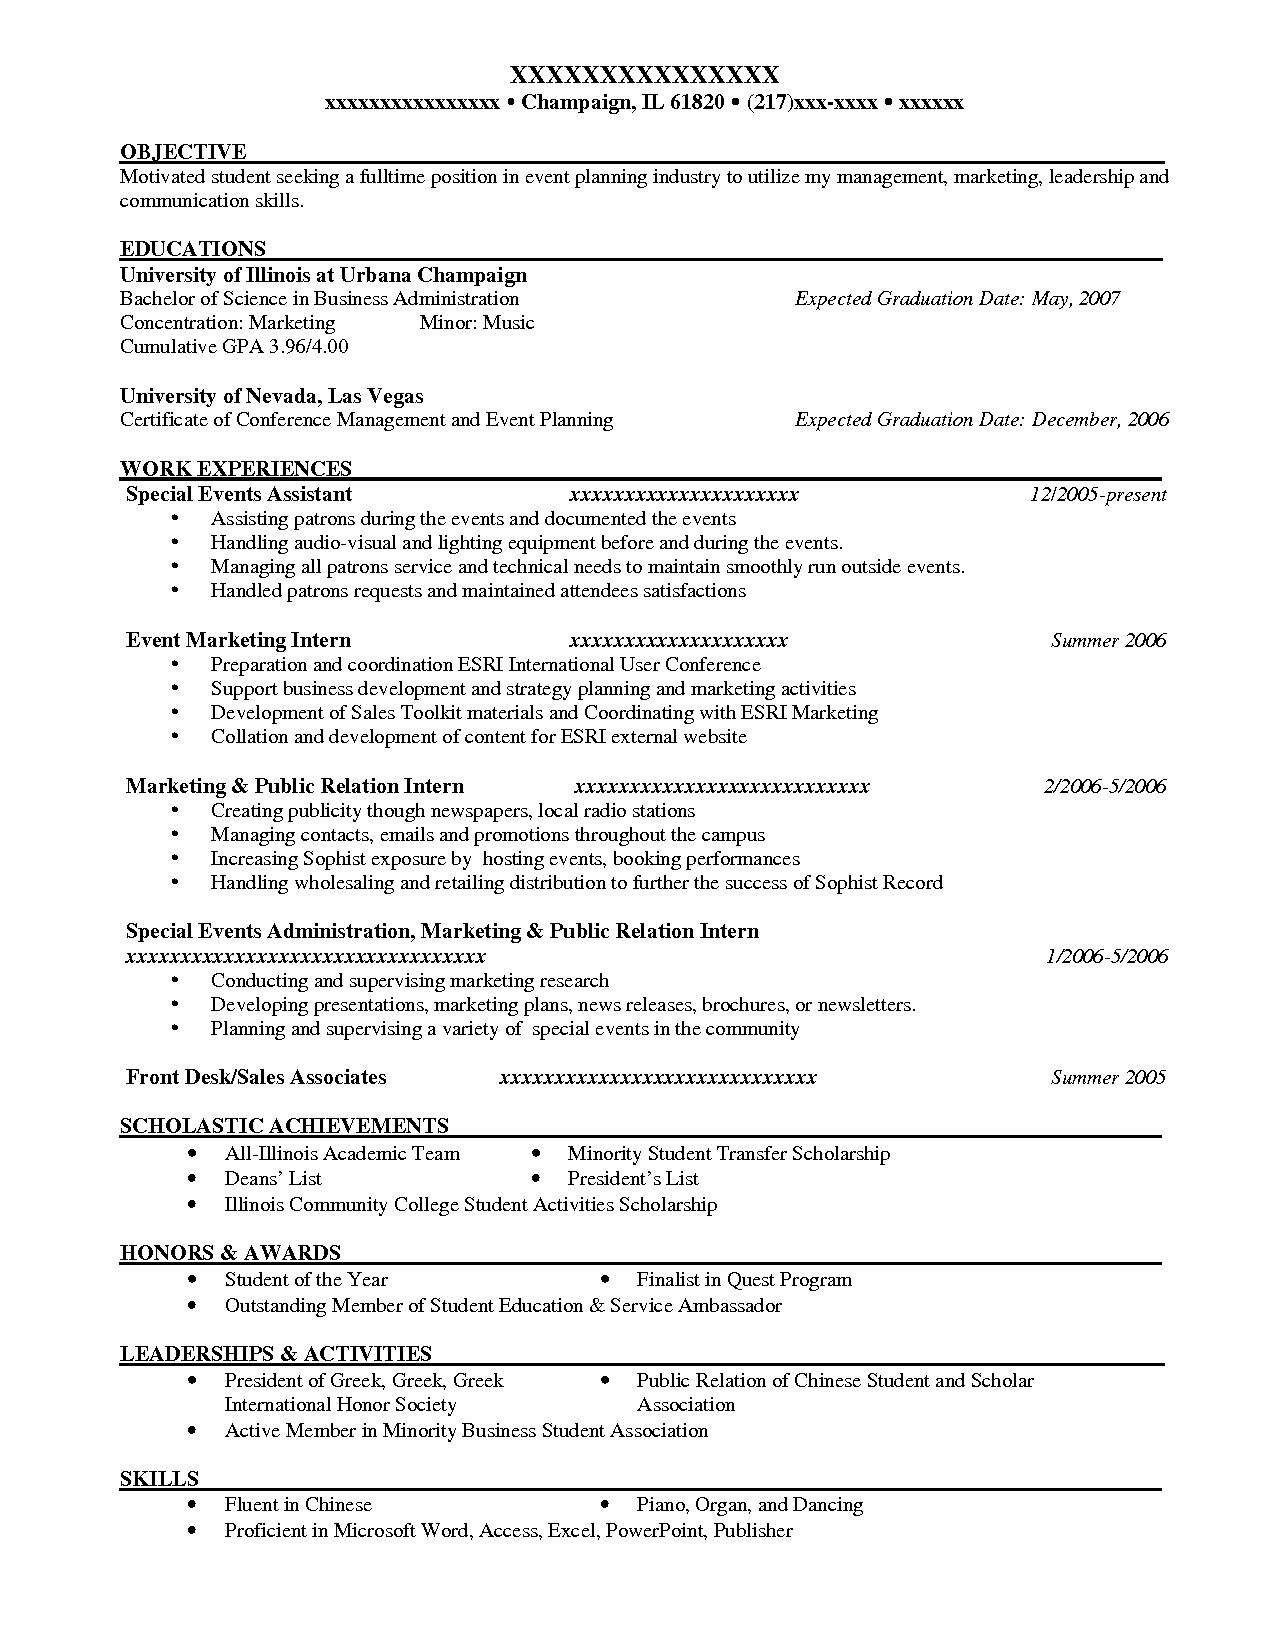 example of resume objective statement